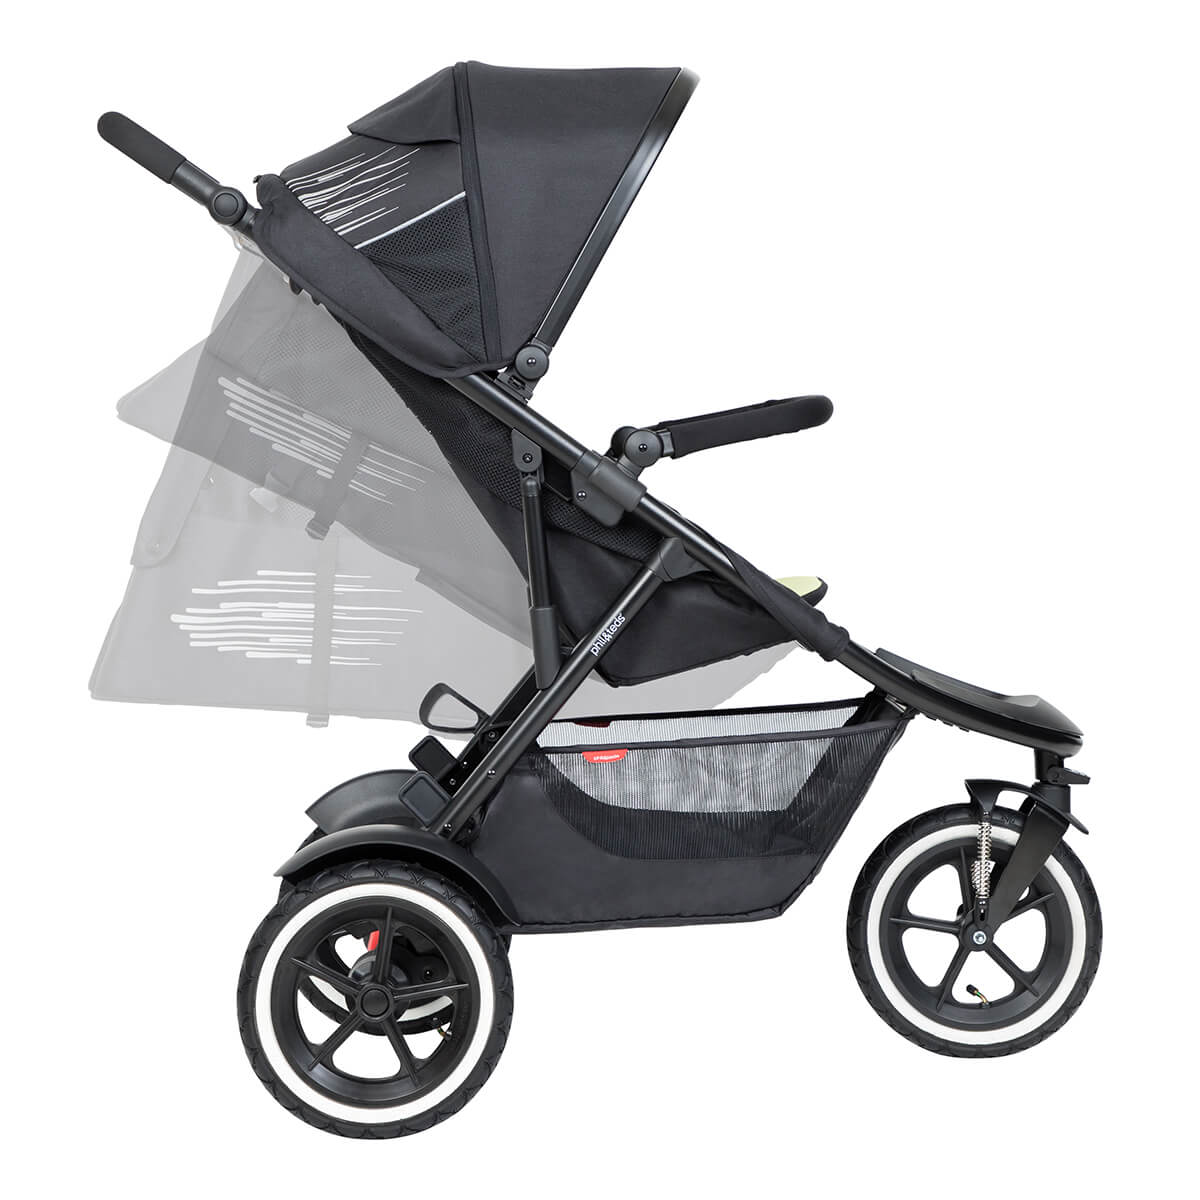 https://cdn.accentuate.io/7552750420138/19793939267754/philteds-sport-buggy-can-recline-in-multiple-angles-including-full-recline-for-newborn-baby-v1664411442070.jpg?1200x1200